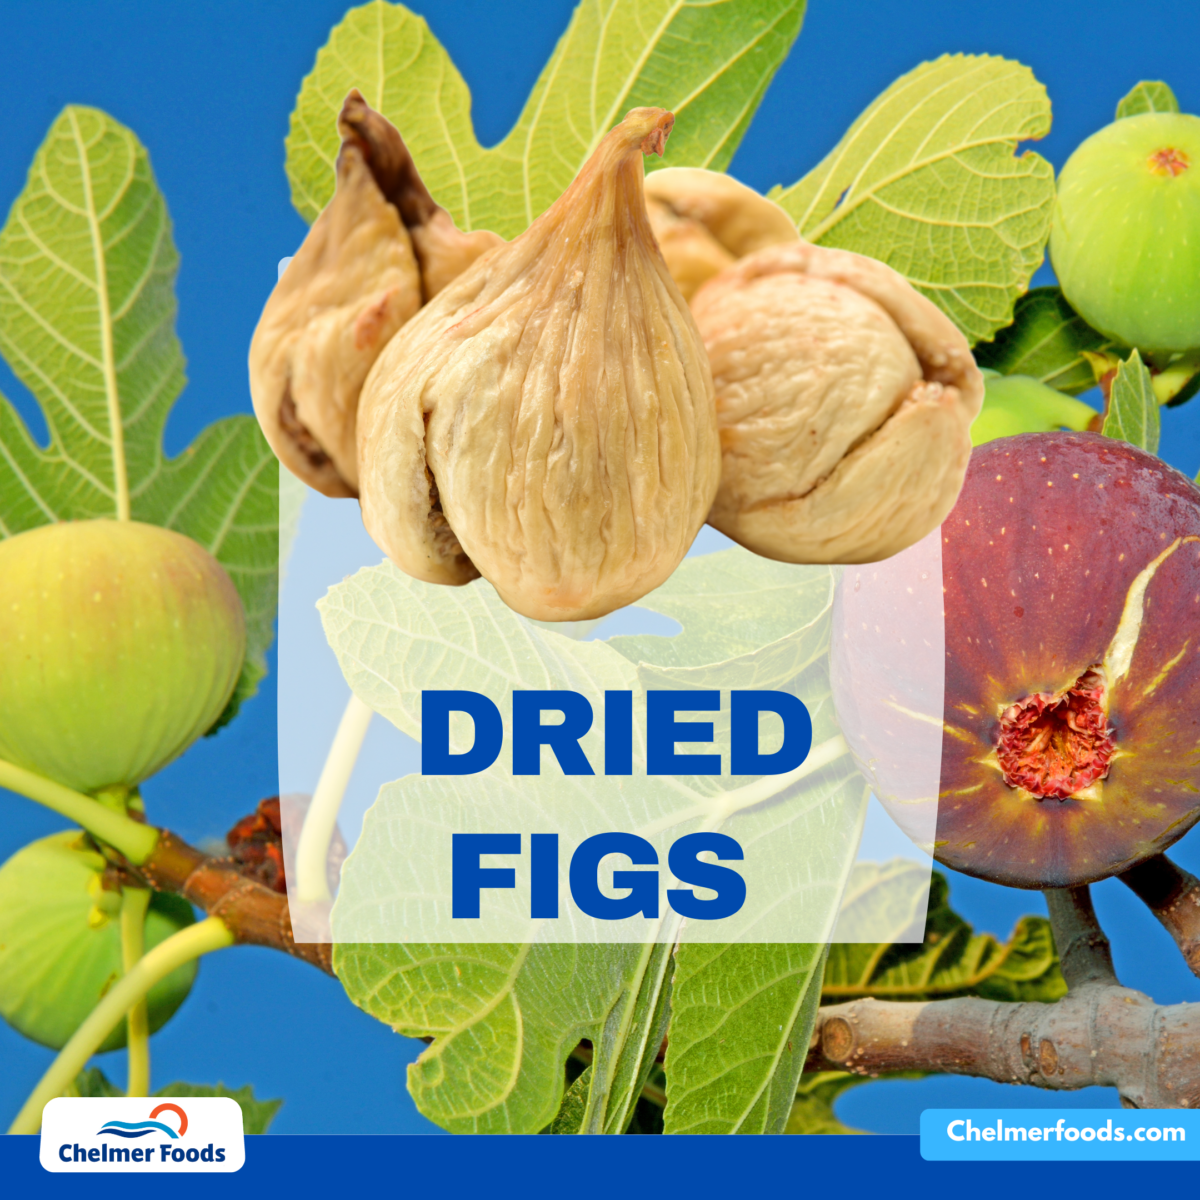 Dried figs: capacities to be shared for months